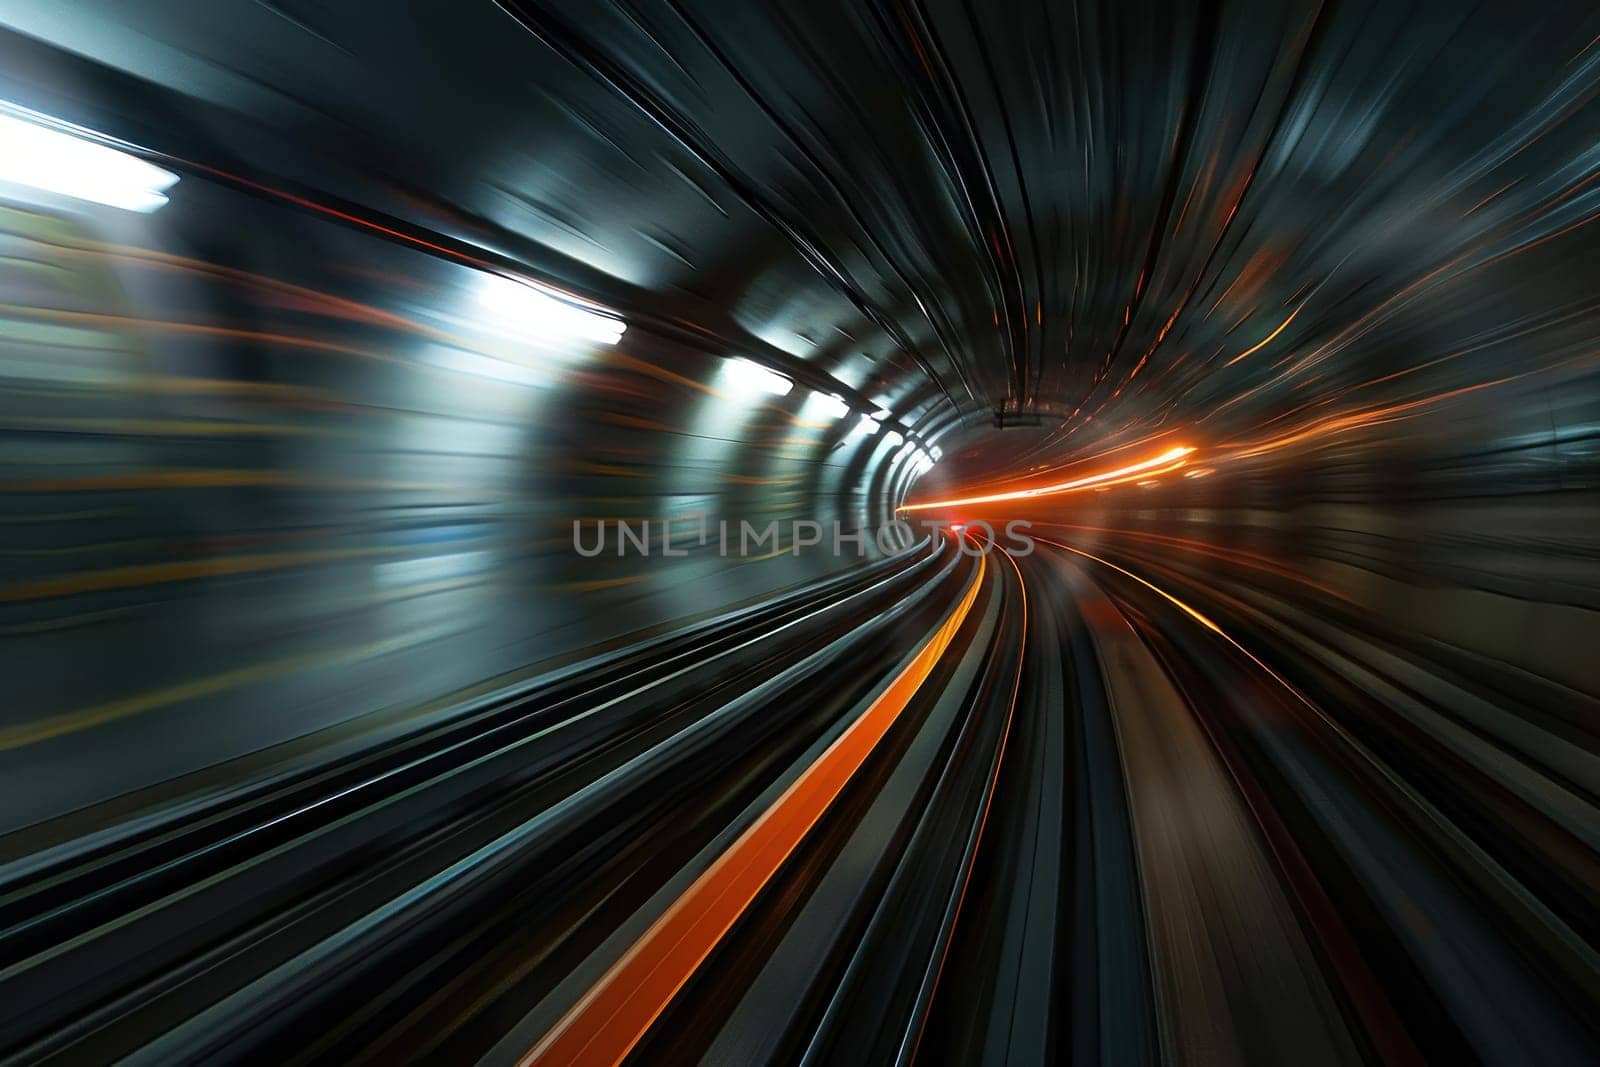 A tunnel with a train going through it. The tunnel is dark and the train is moving quickly